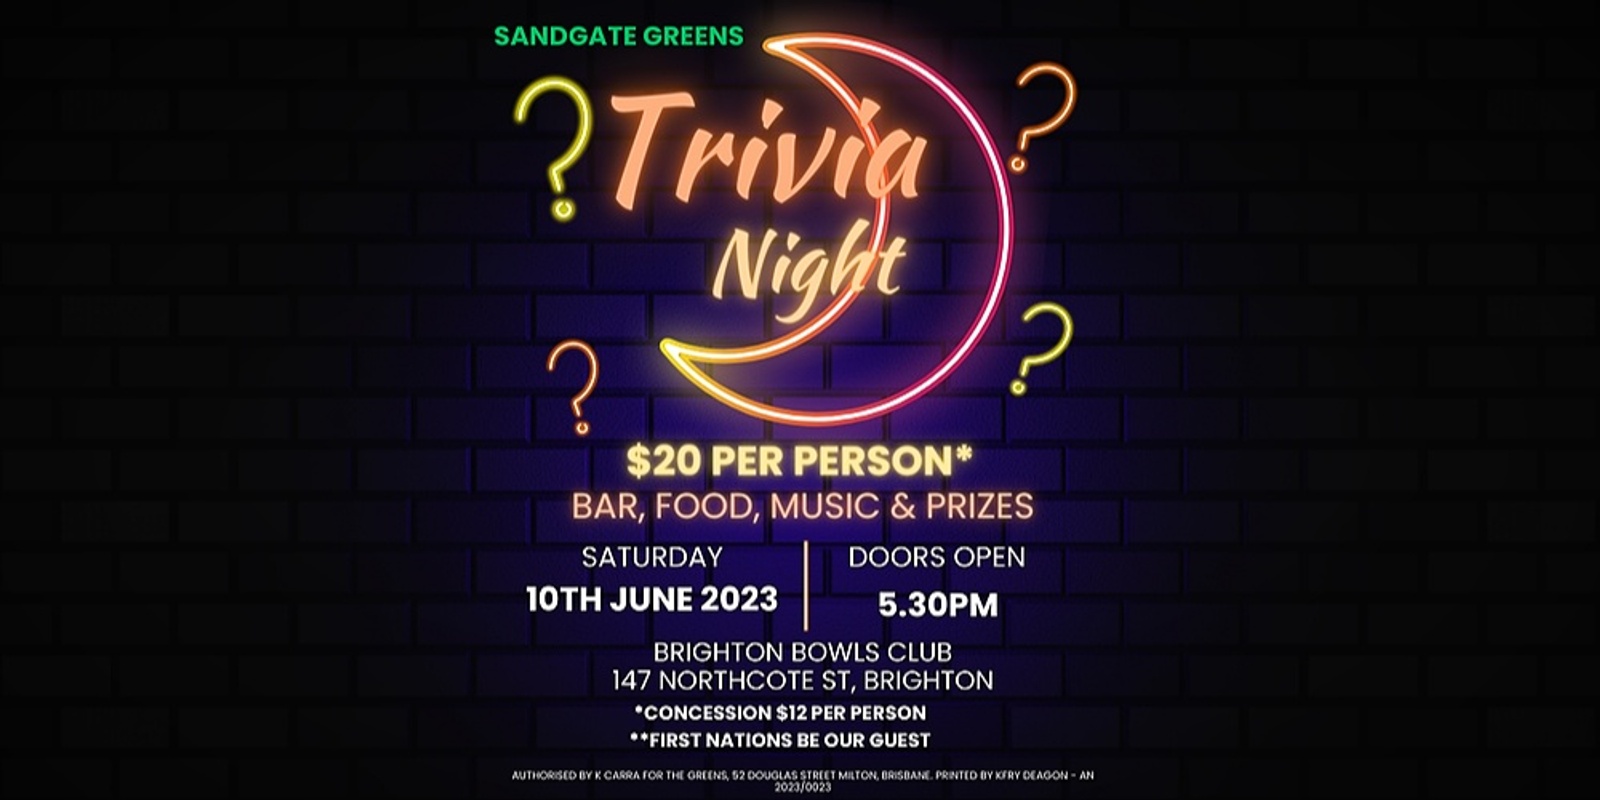 Banner image for Sandgate Greens Annual Trivia Night